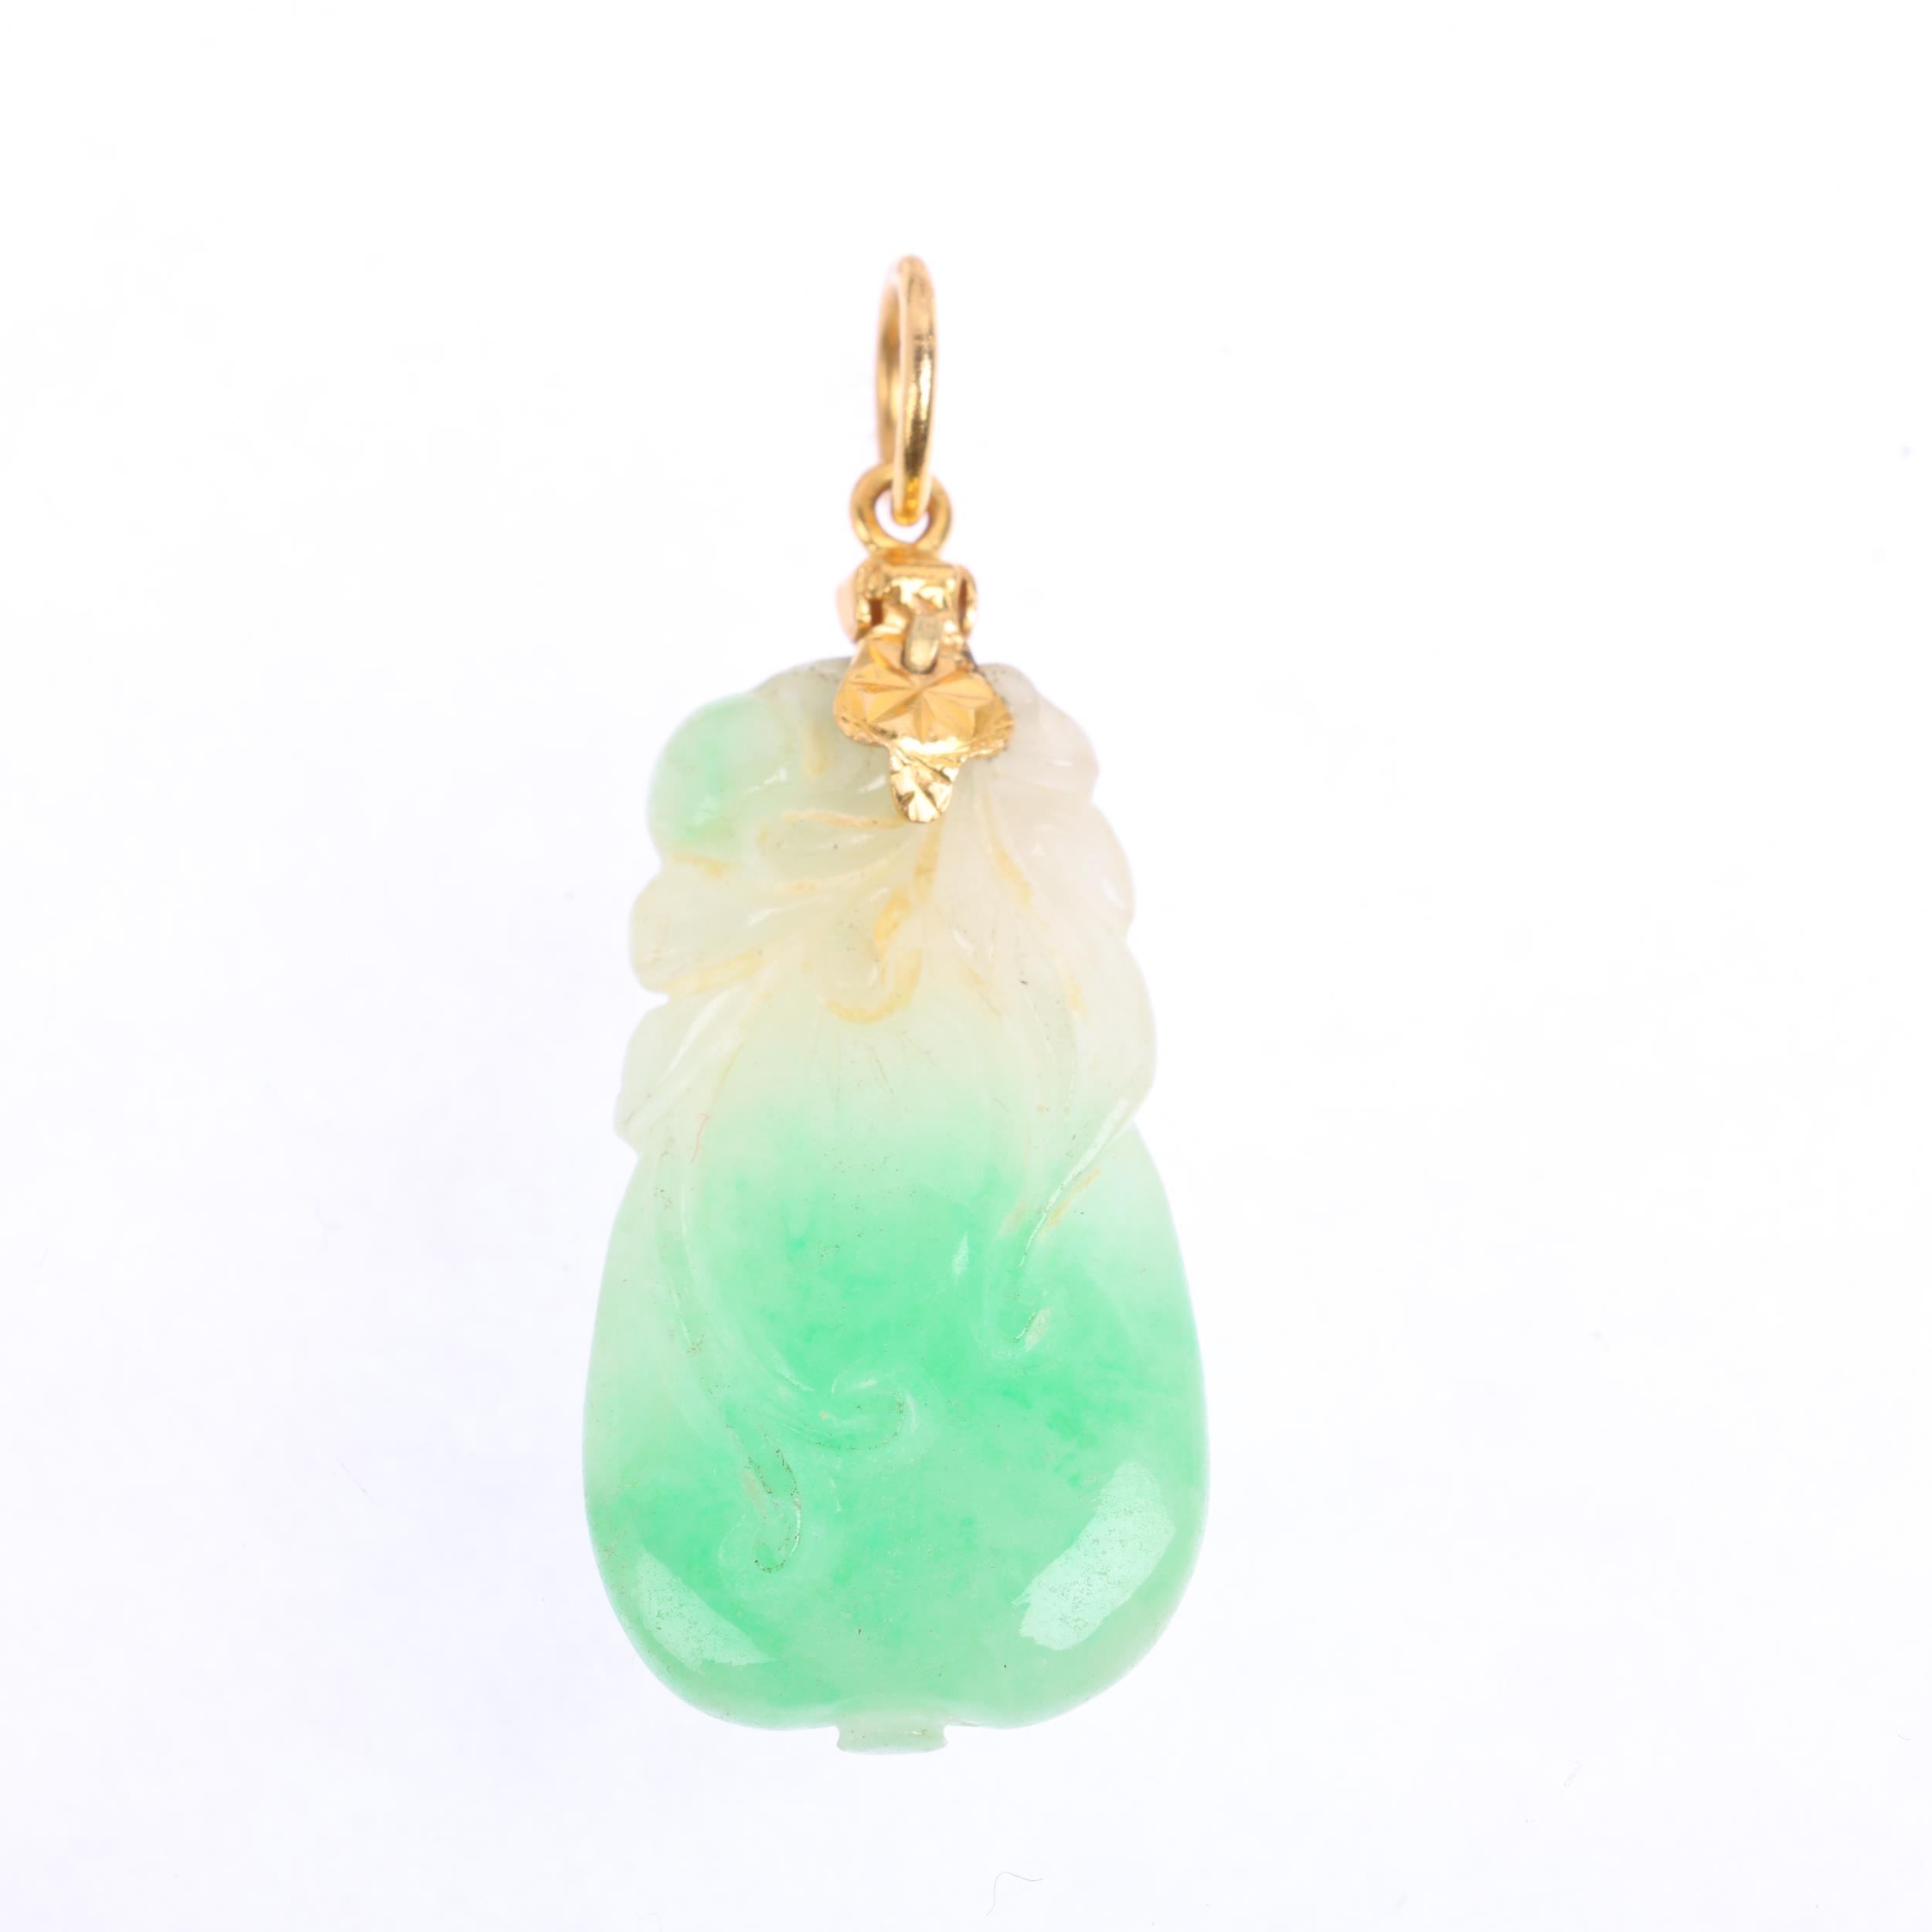 A Chinese carved jade gourd fruit pendant, with unmarked 21ct gold mount, 32.3mm, 3.9g Condition - Image 3 of 4